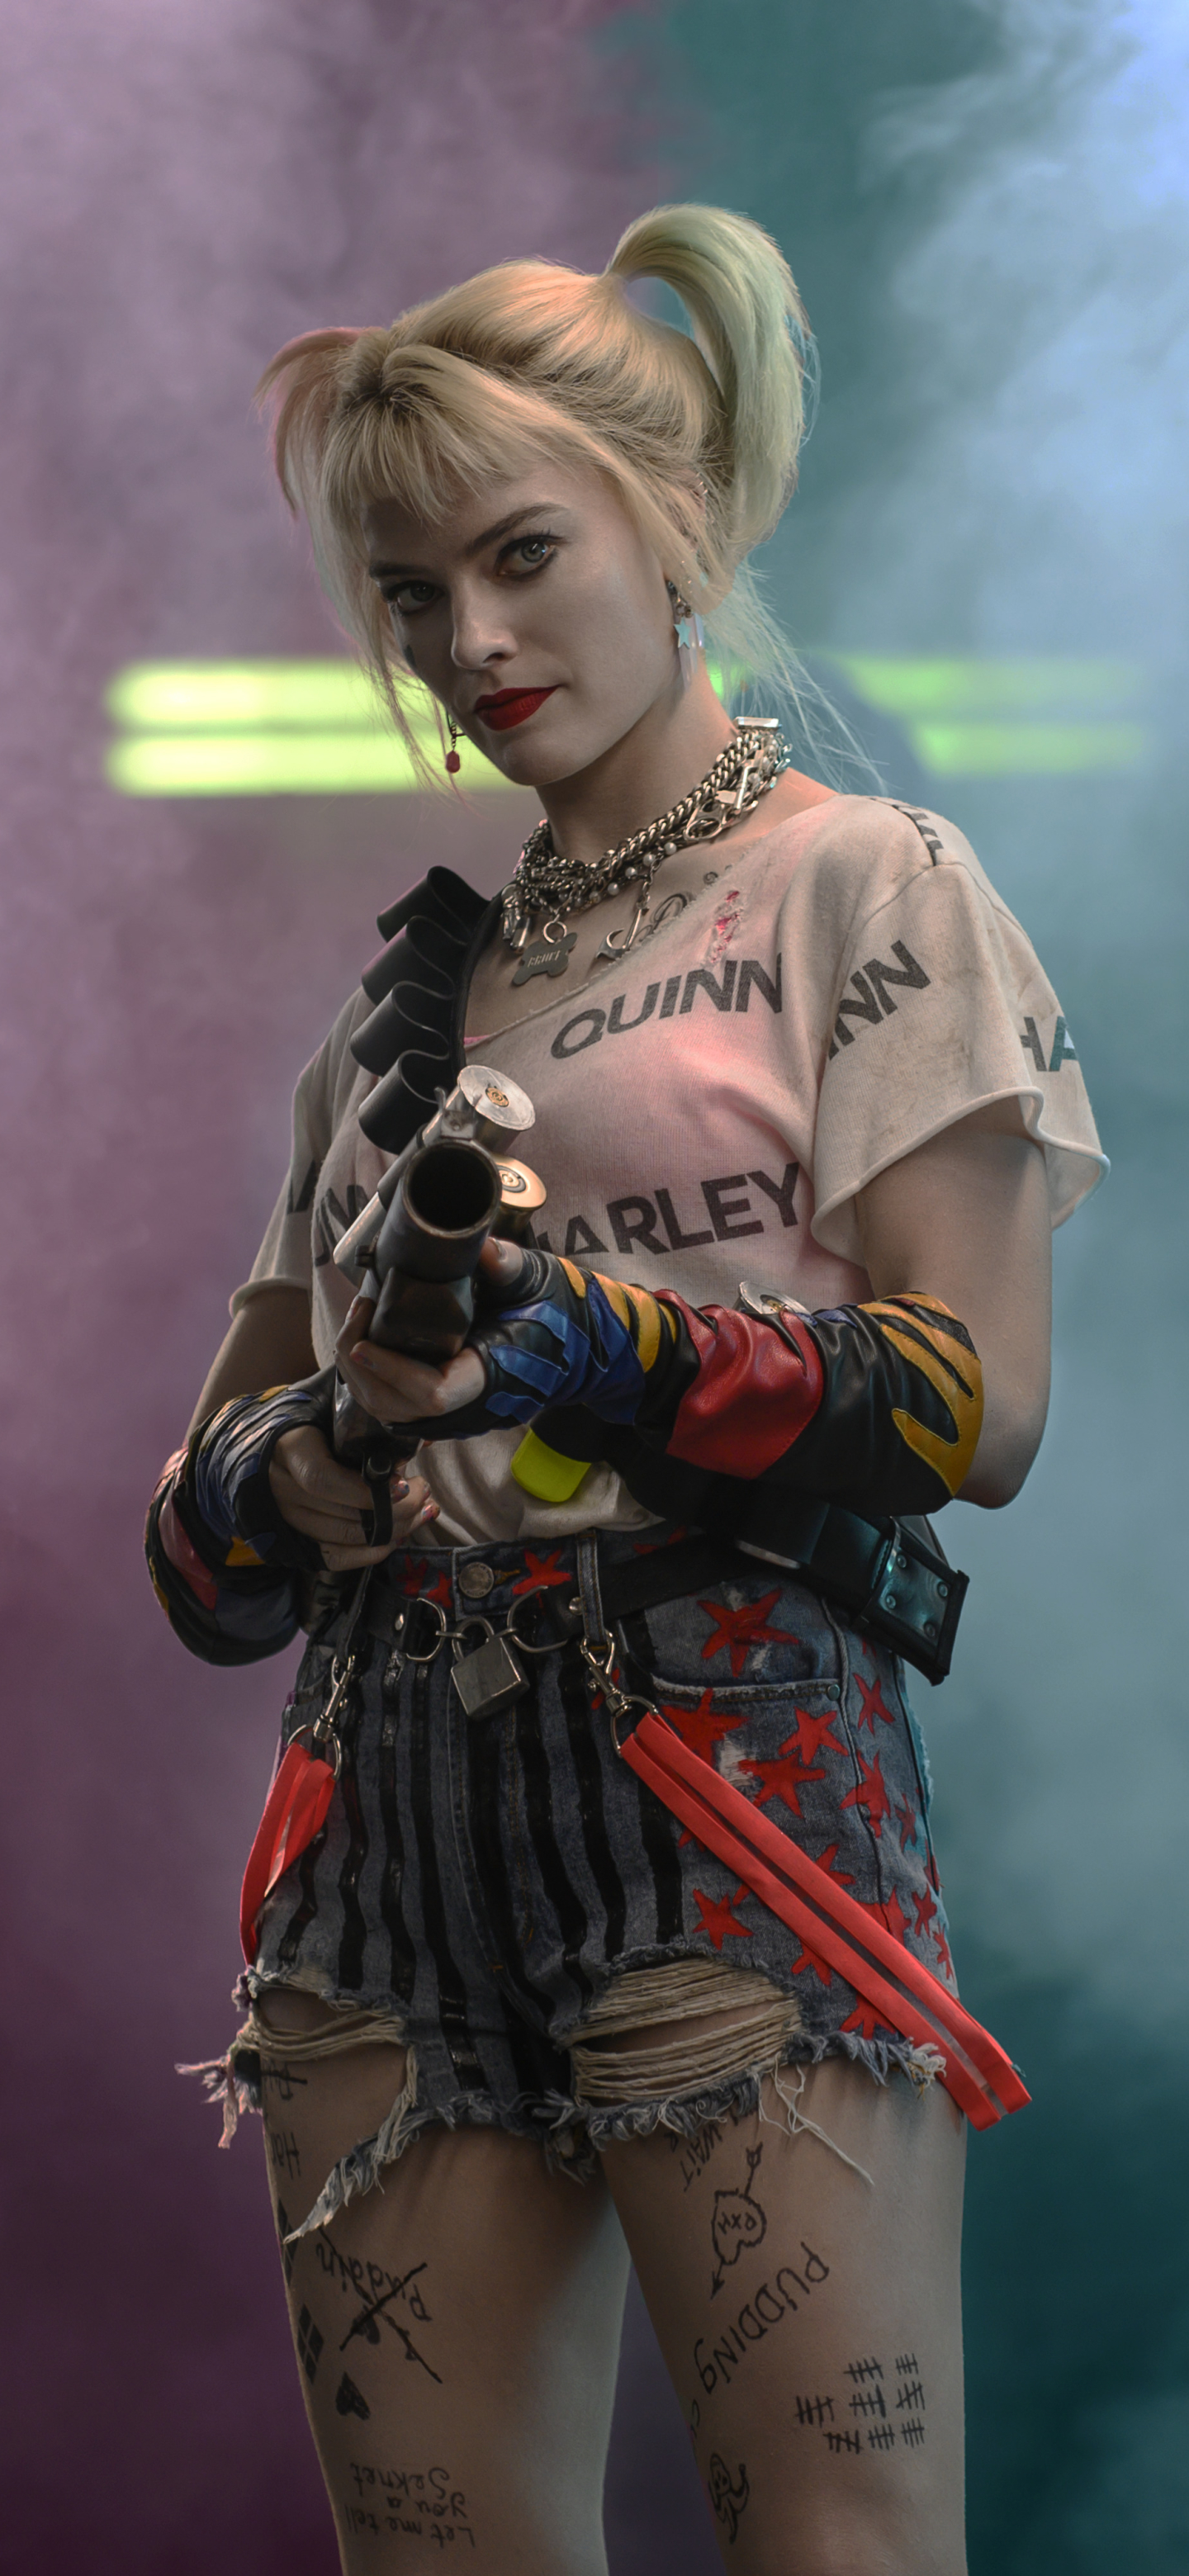 margot robbie, movie, birds of prey (and the fantabulous emancipation of one harley quinn), harley quinn iphone wallpaper